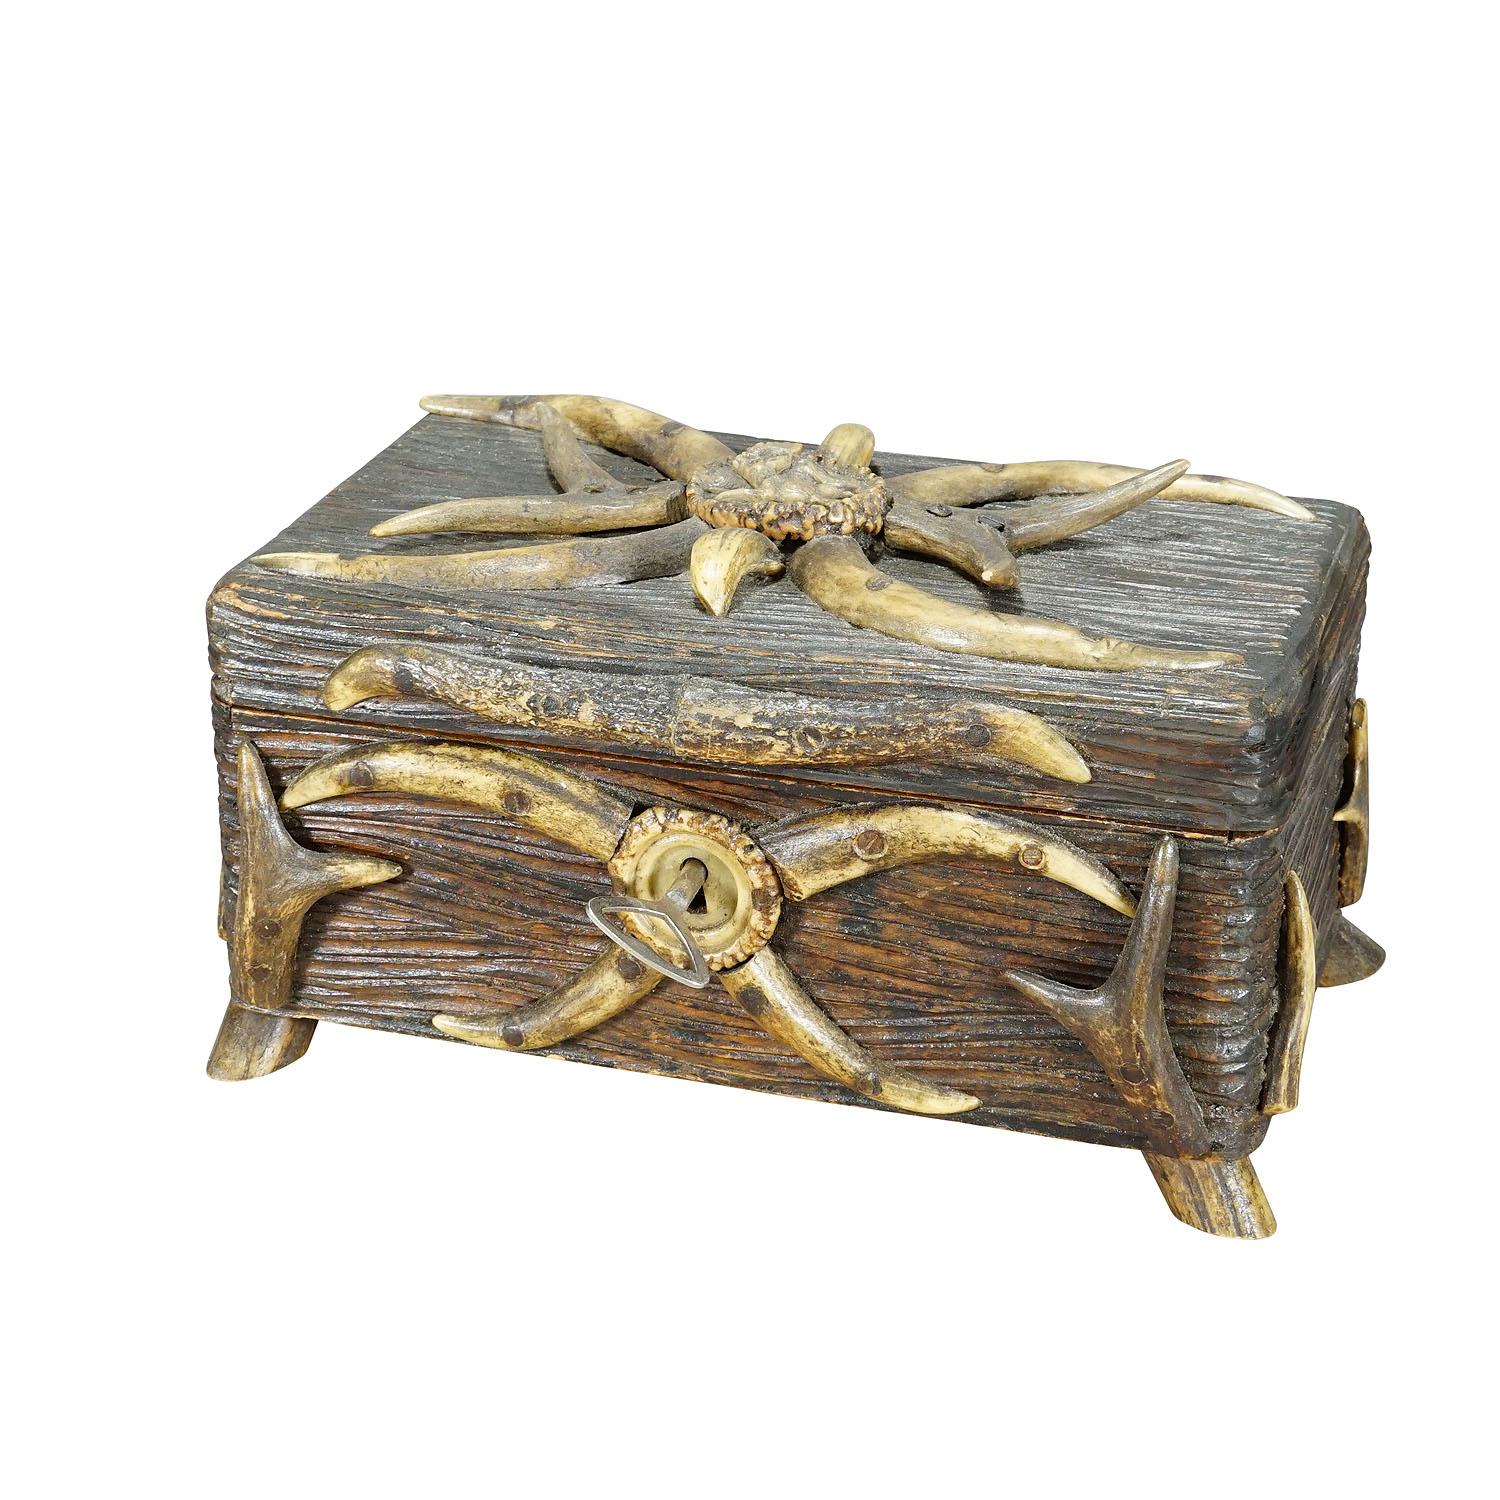 Antique Black Forest Casket with Antlers Decoration circa 1900s

A marvelous rustic wooden casket or cigar box. It is made of handcarved pine wood panels, decorated with several deer antler pieces and wild boar tusks, on the lid with fine carved